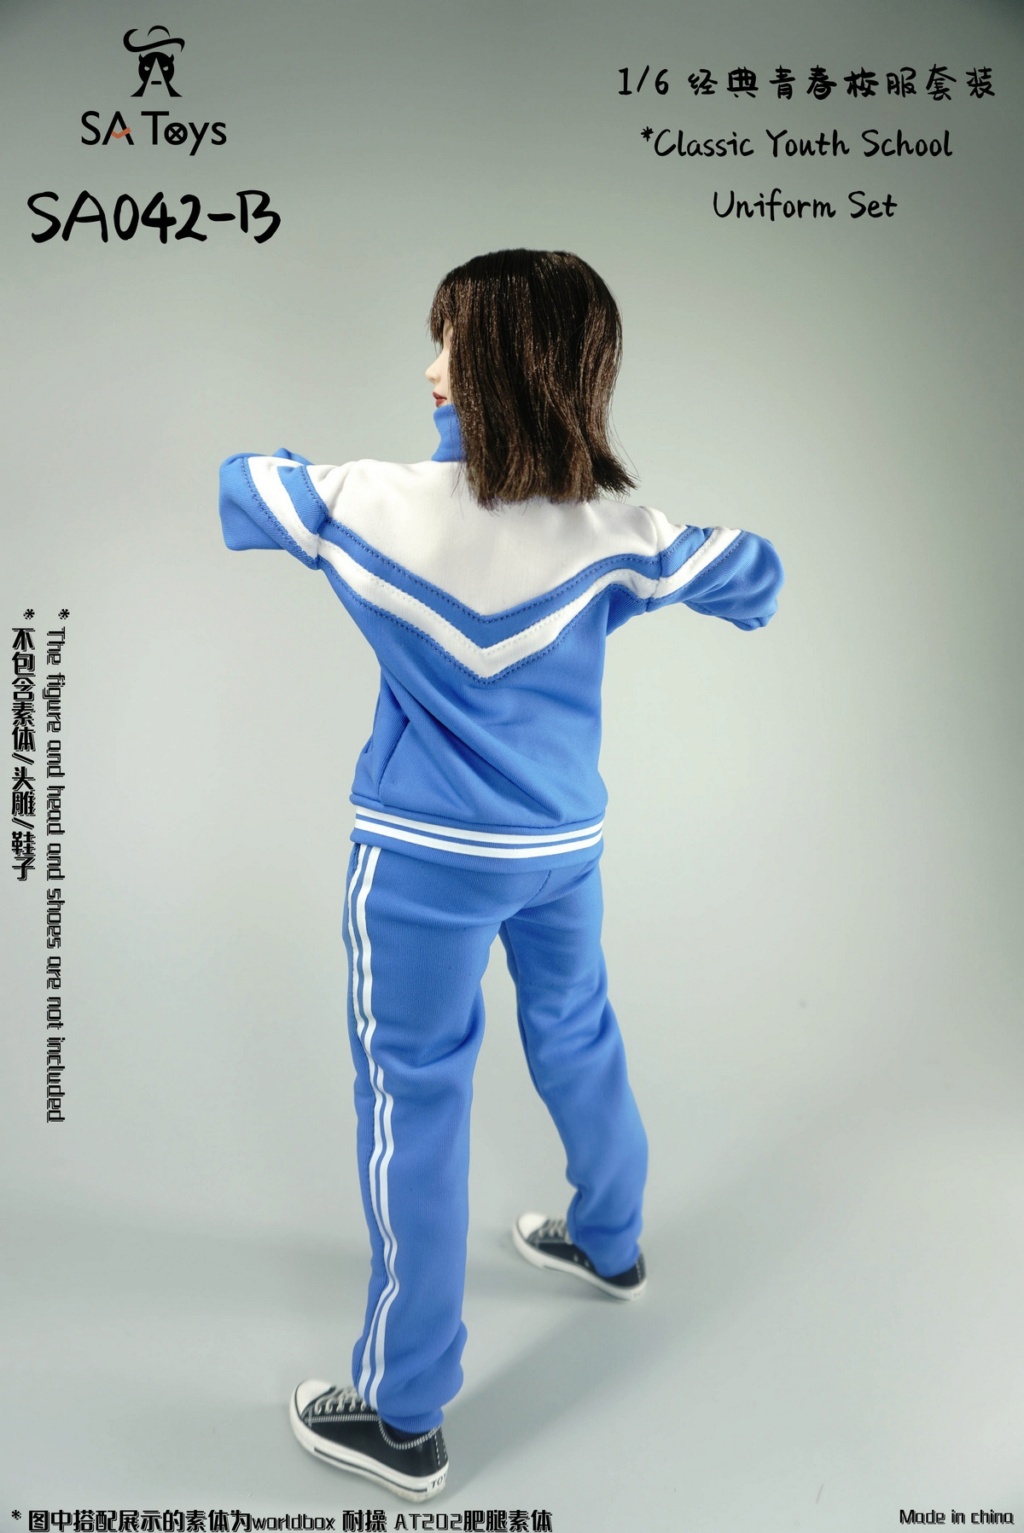 Female - NEW PRODUCT: SA Toys: 1/6 Classic Youth School Clothing （SA042 A/B） 12183810